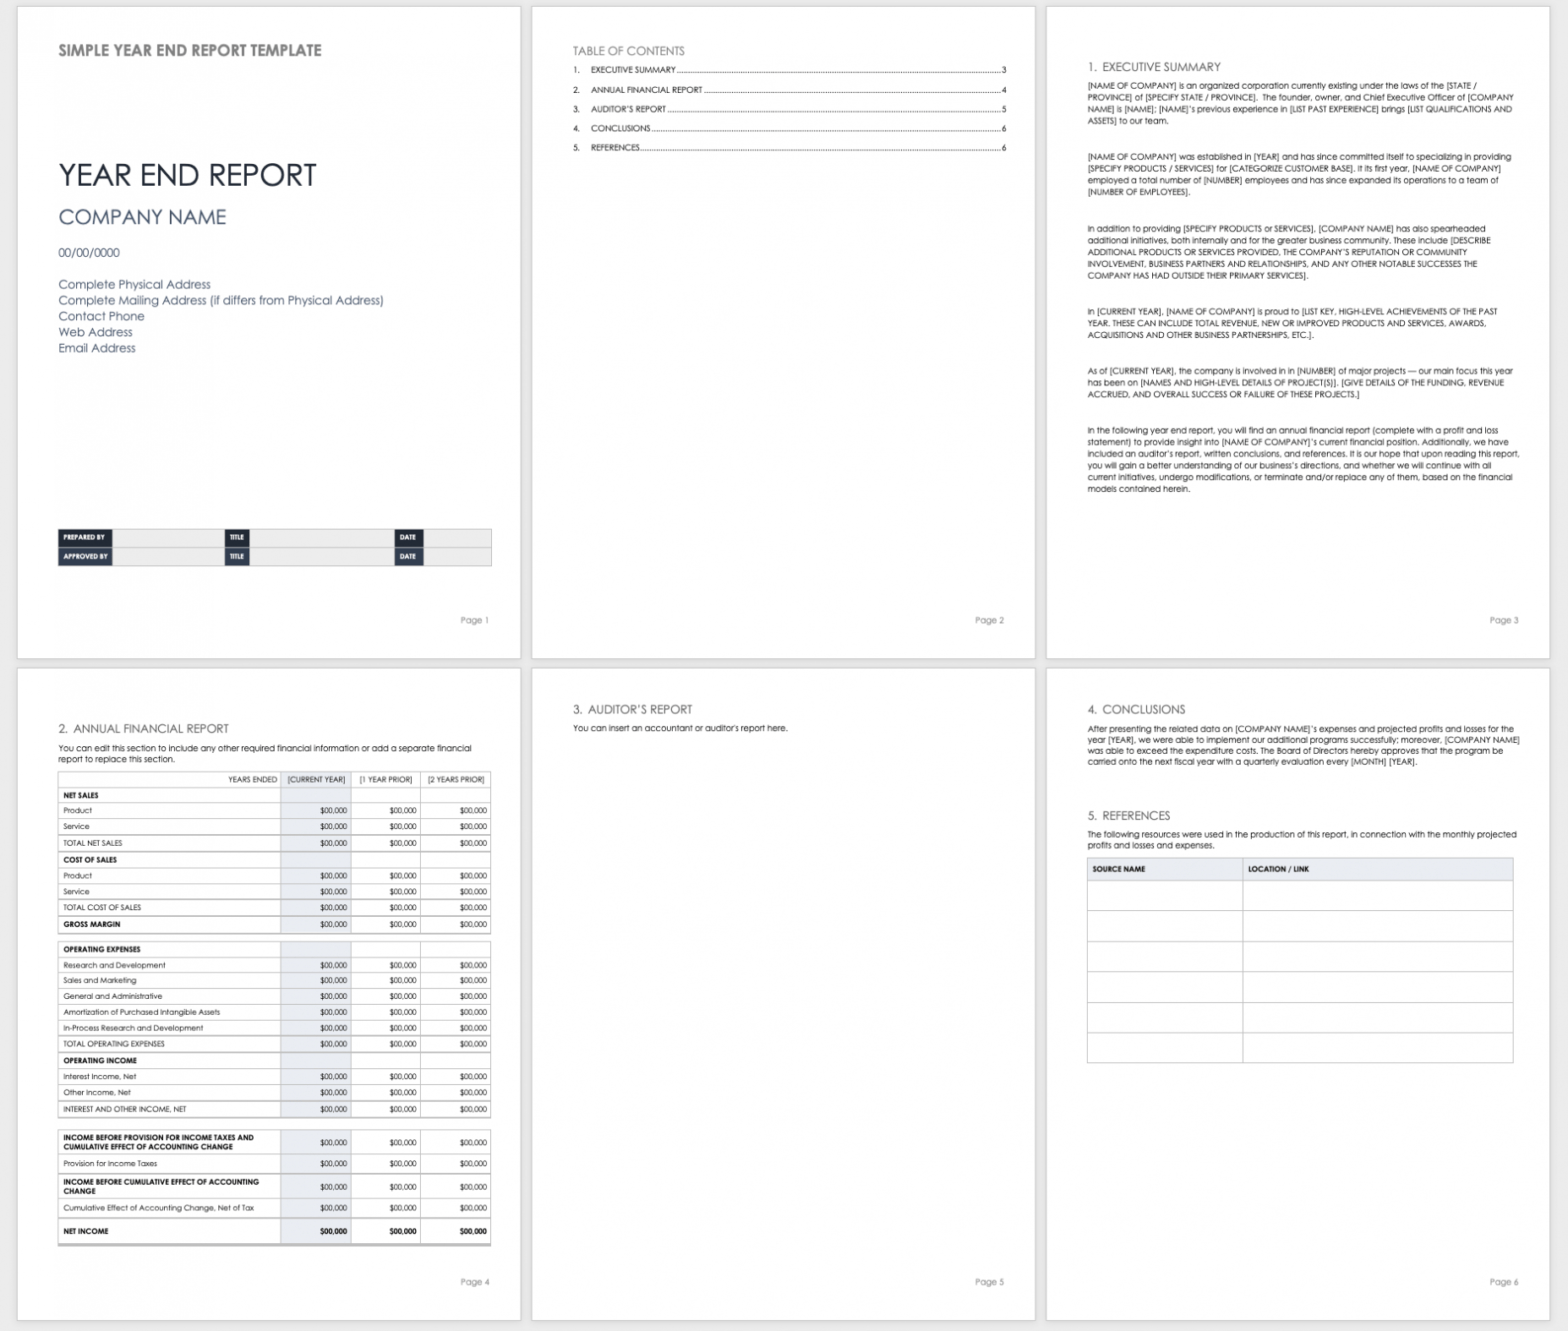 Free Year End Report Templates | Smartsheet inside Annual Financial Report Template Word